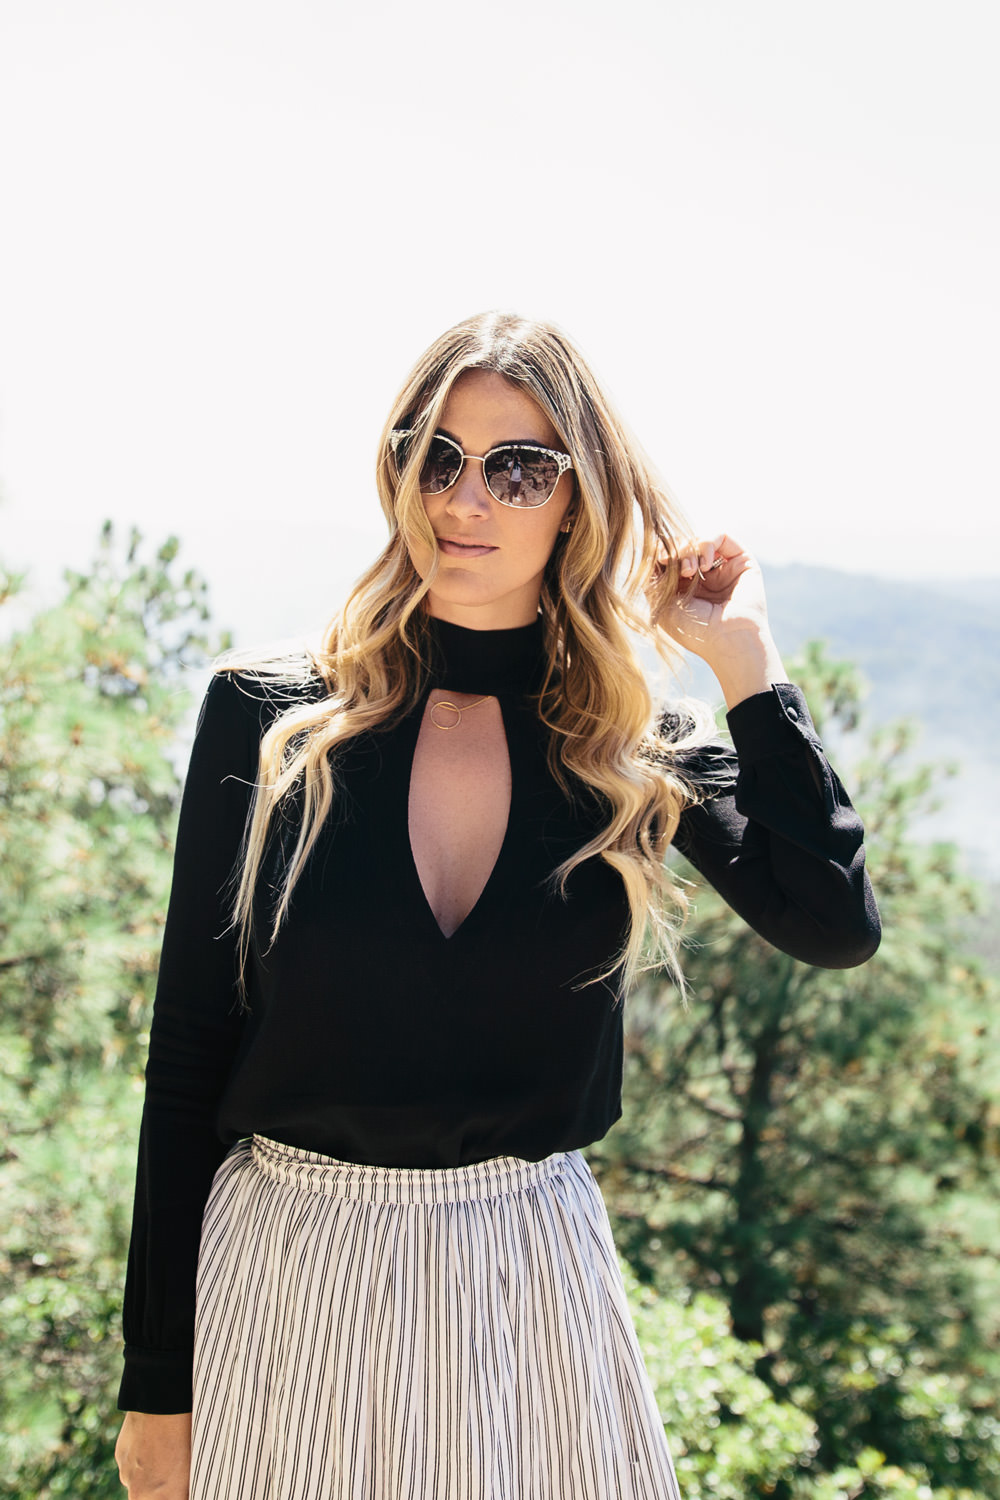 Dash of Darling styles a keyhole neckline top with a maxi skirt and DVF sunglasses while exploring Payson Arizona in the Fall.